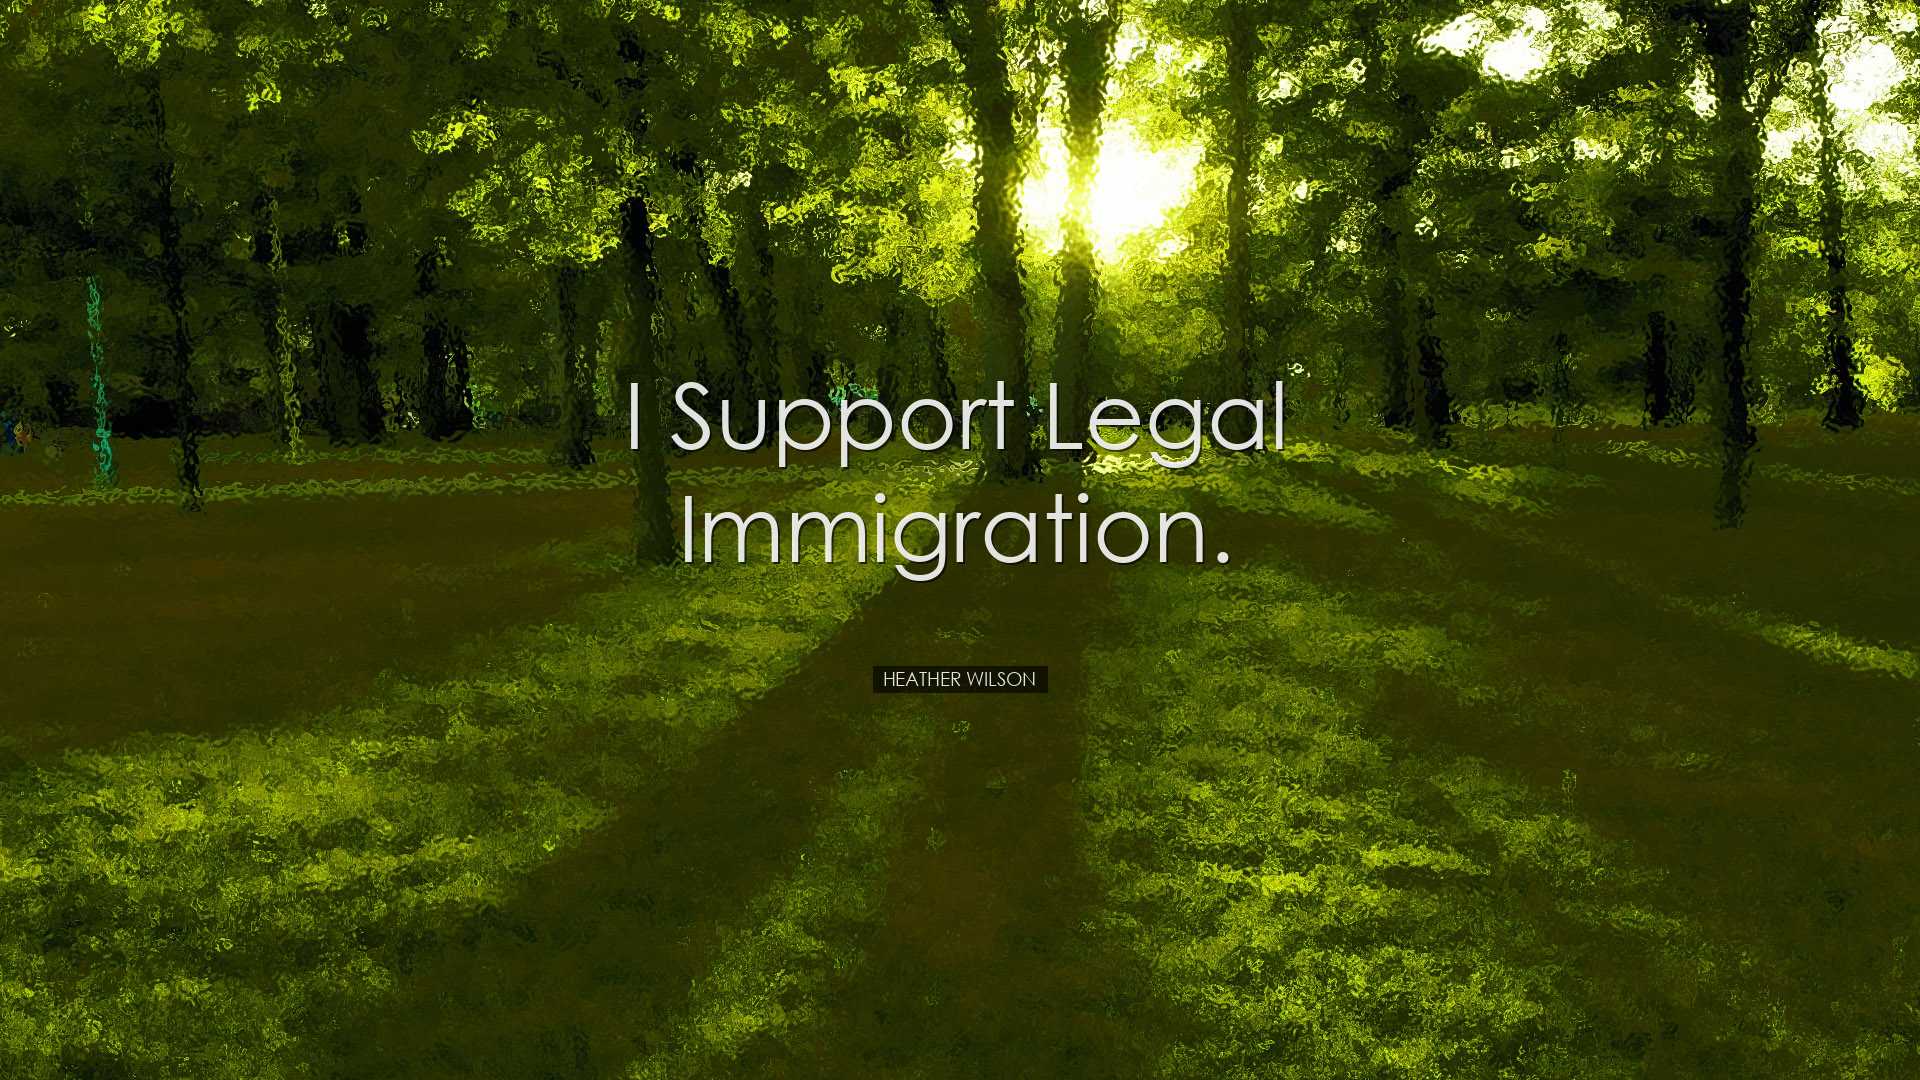 I support legal immigration. - Heather Wilson